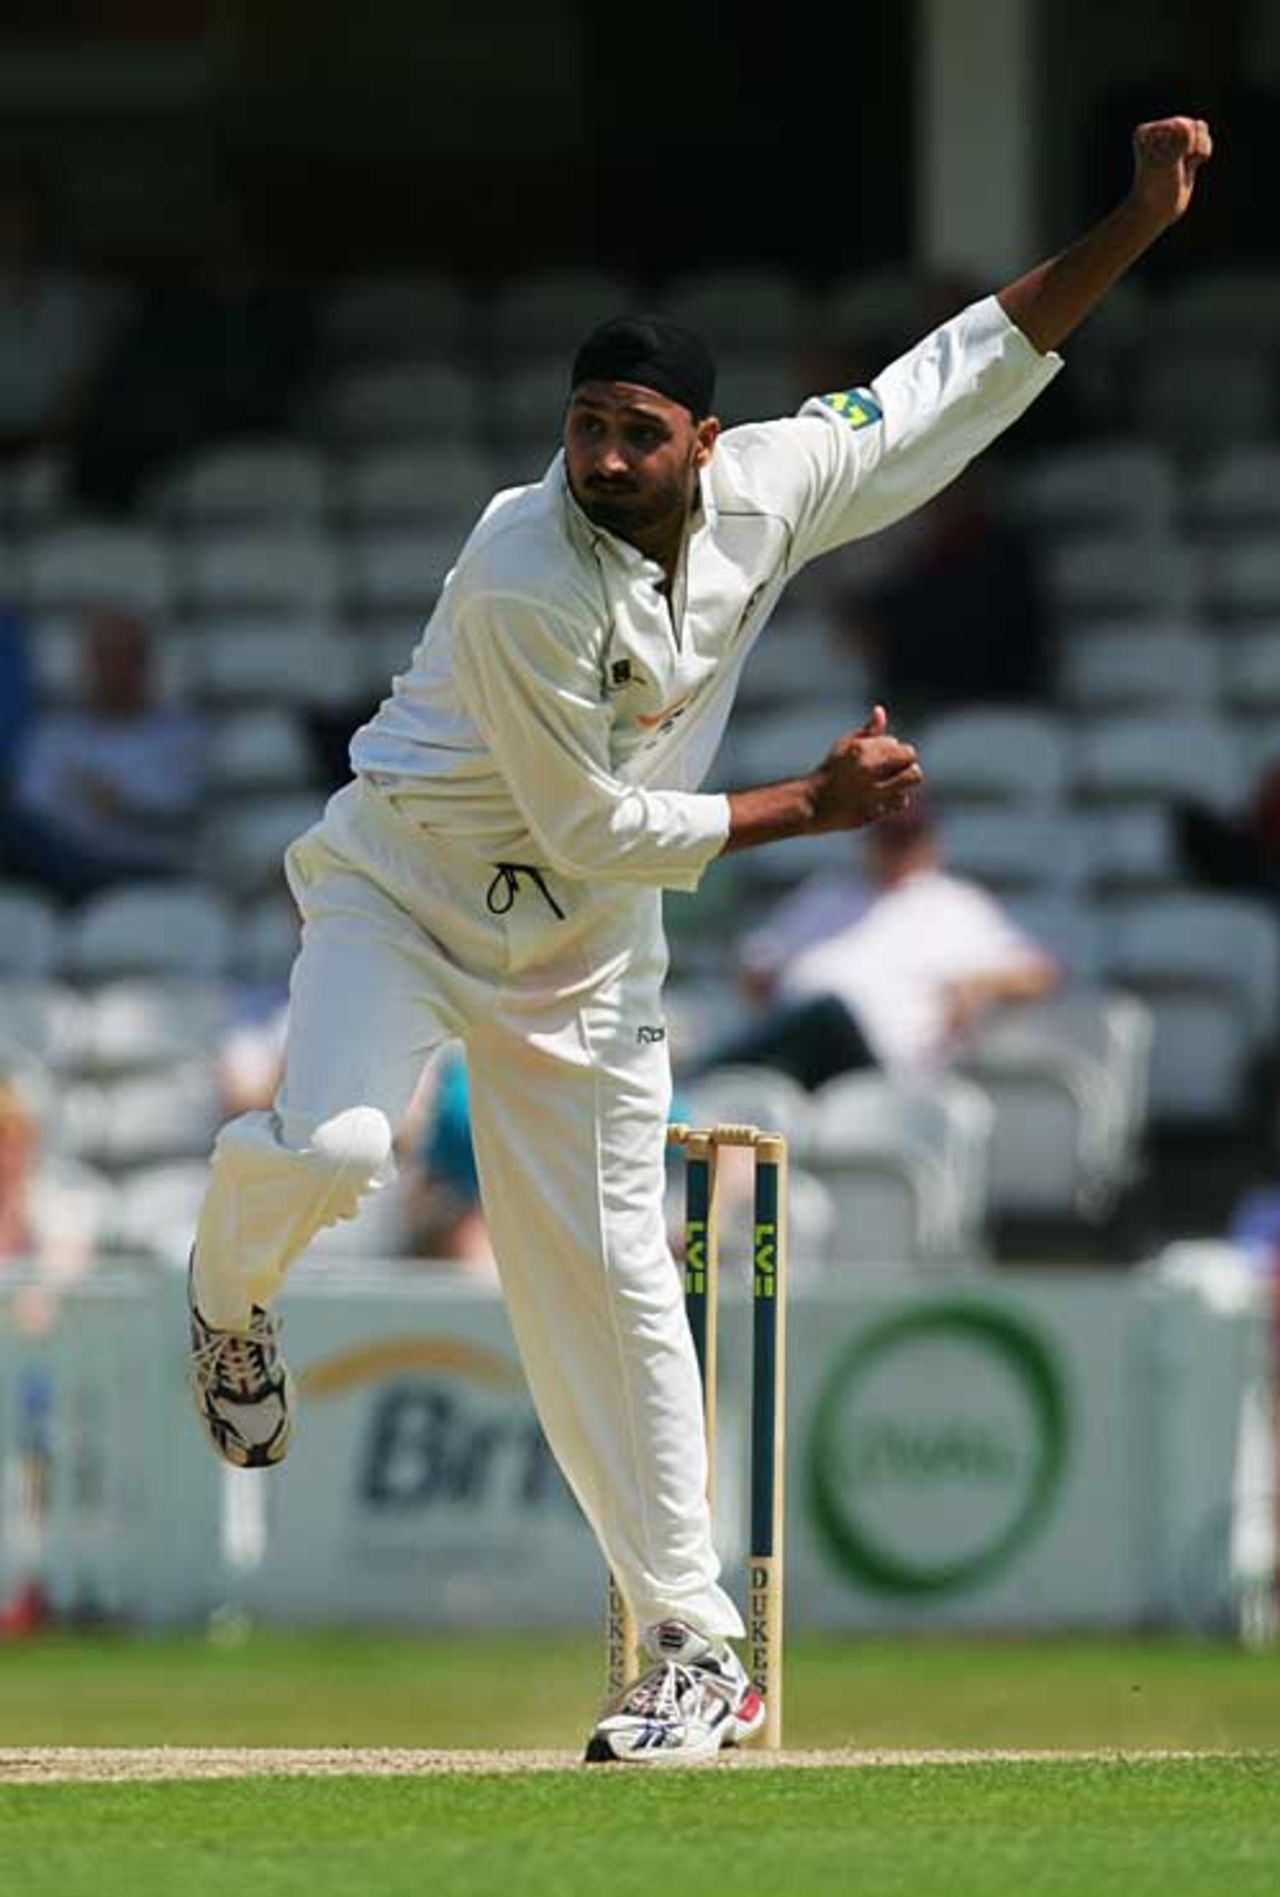 Harbhajan Singh begins his stint for Surrey with three wickets, Surrey v Durham, County Championship, The Oval, July 8, 2007